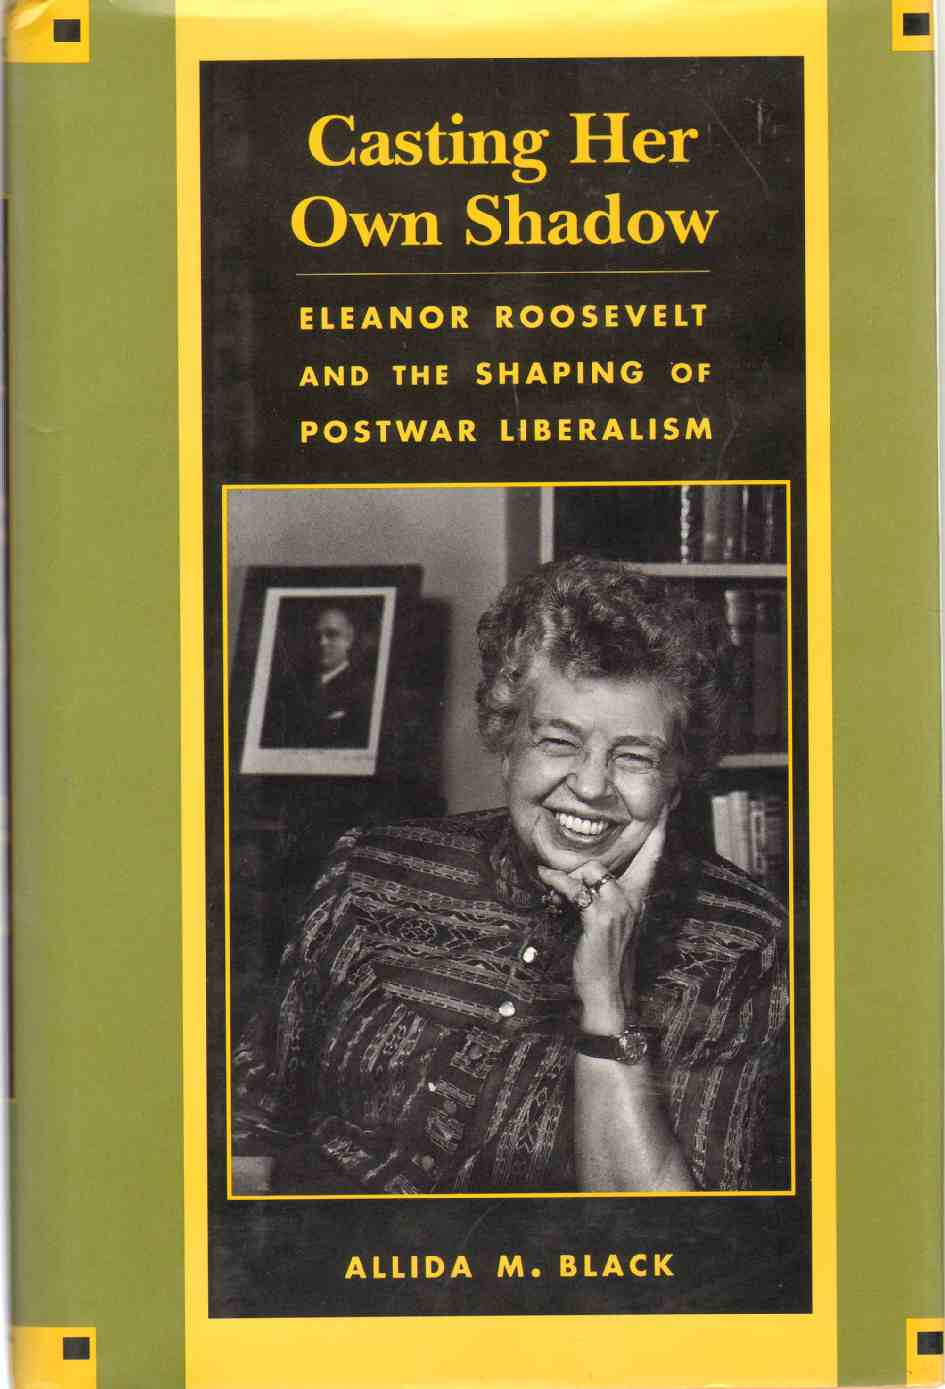 Image for CASTING HER OWN SHADOW Eleanor Roosevelt and the Shaping of Postwar Liberalism